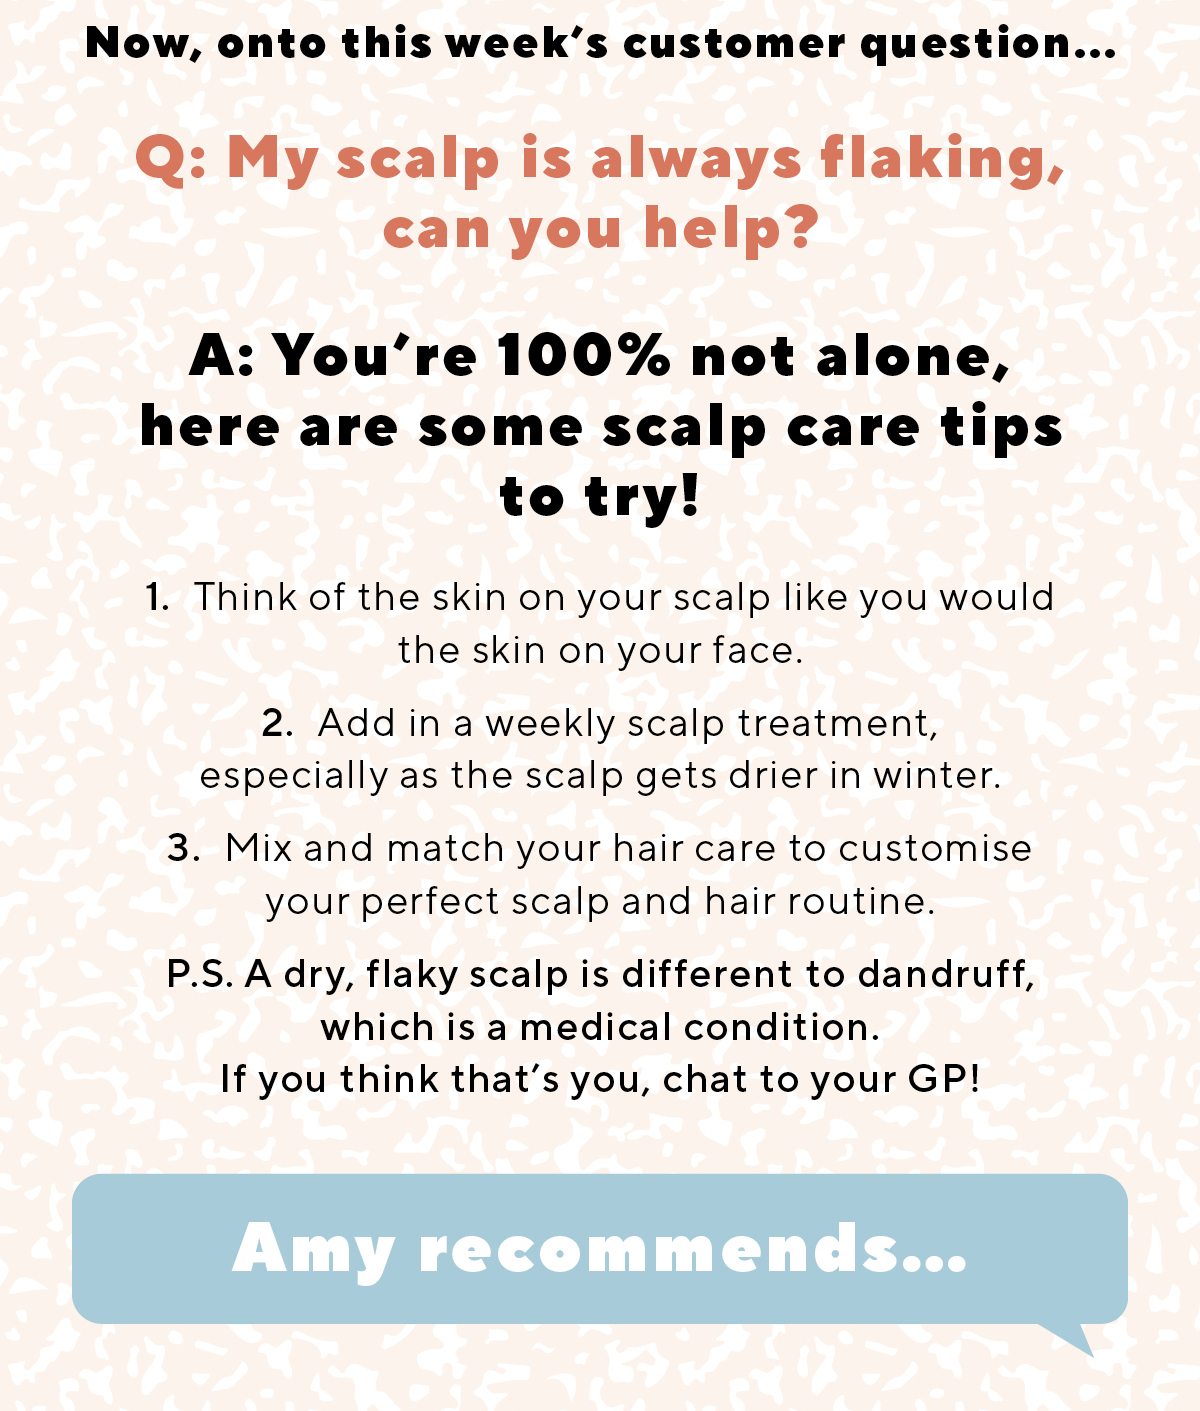 Q: My scalp is always flaking, can you help?